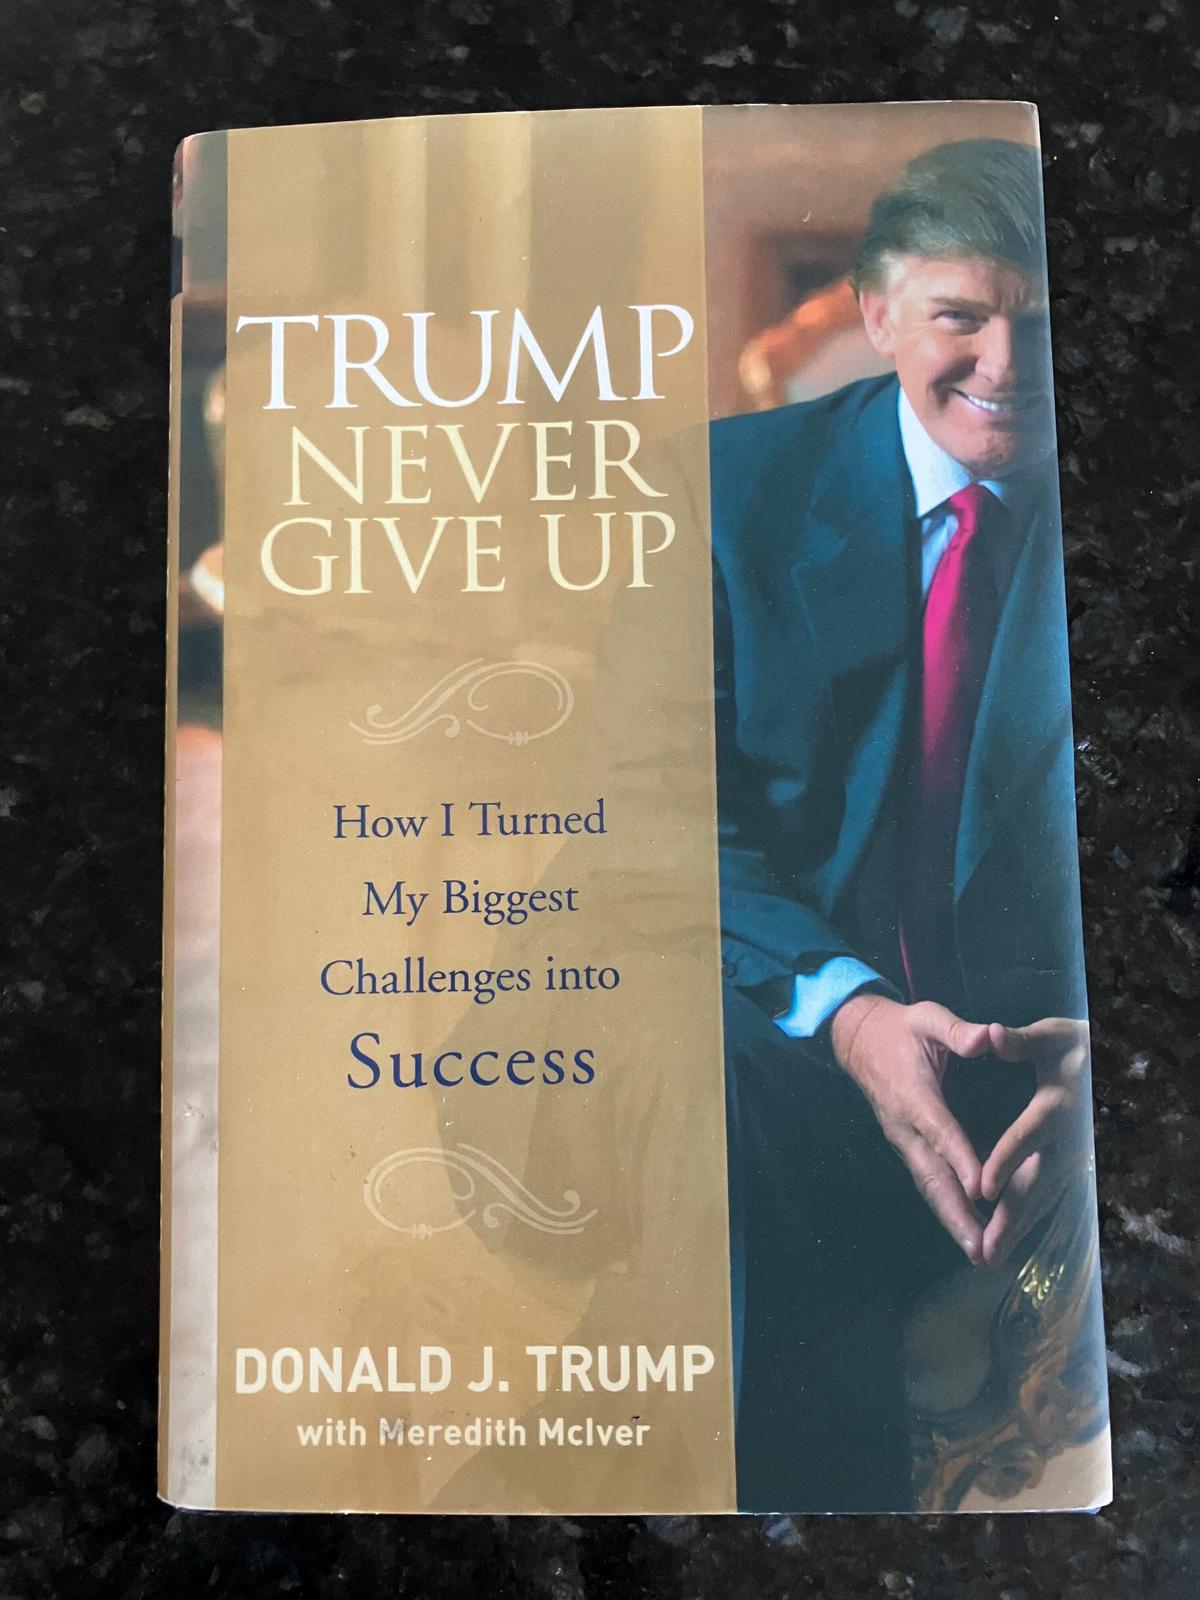 Seven years before he began his successful first run for president, Donald J. Trump authored this 2008 book, "Never Give Up: How I Turned My Biggest Challenges into Success." (Janice Hisle/The Epoch Times)